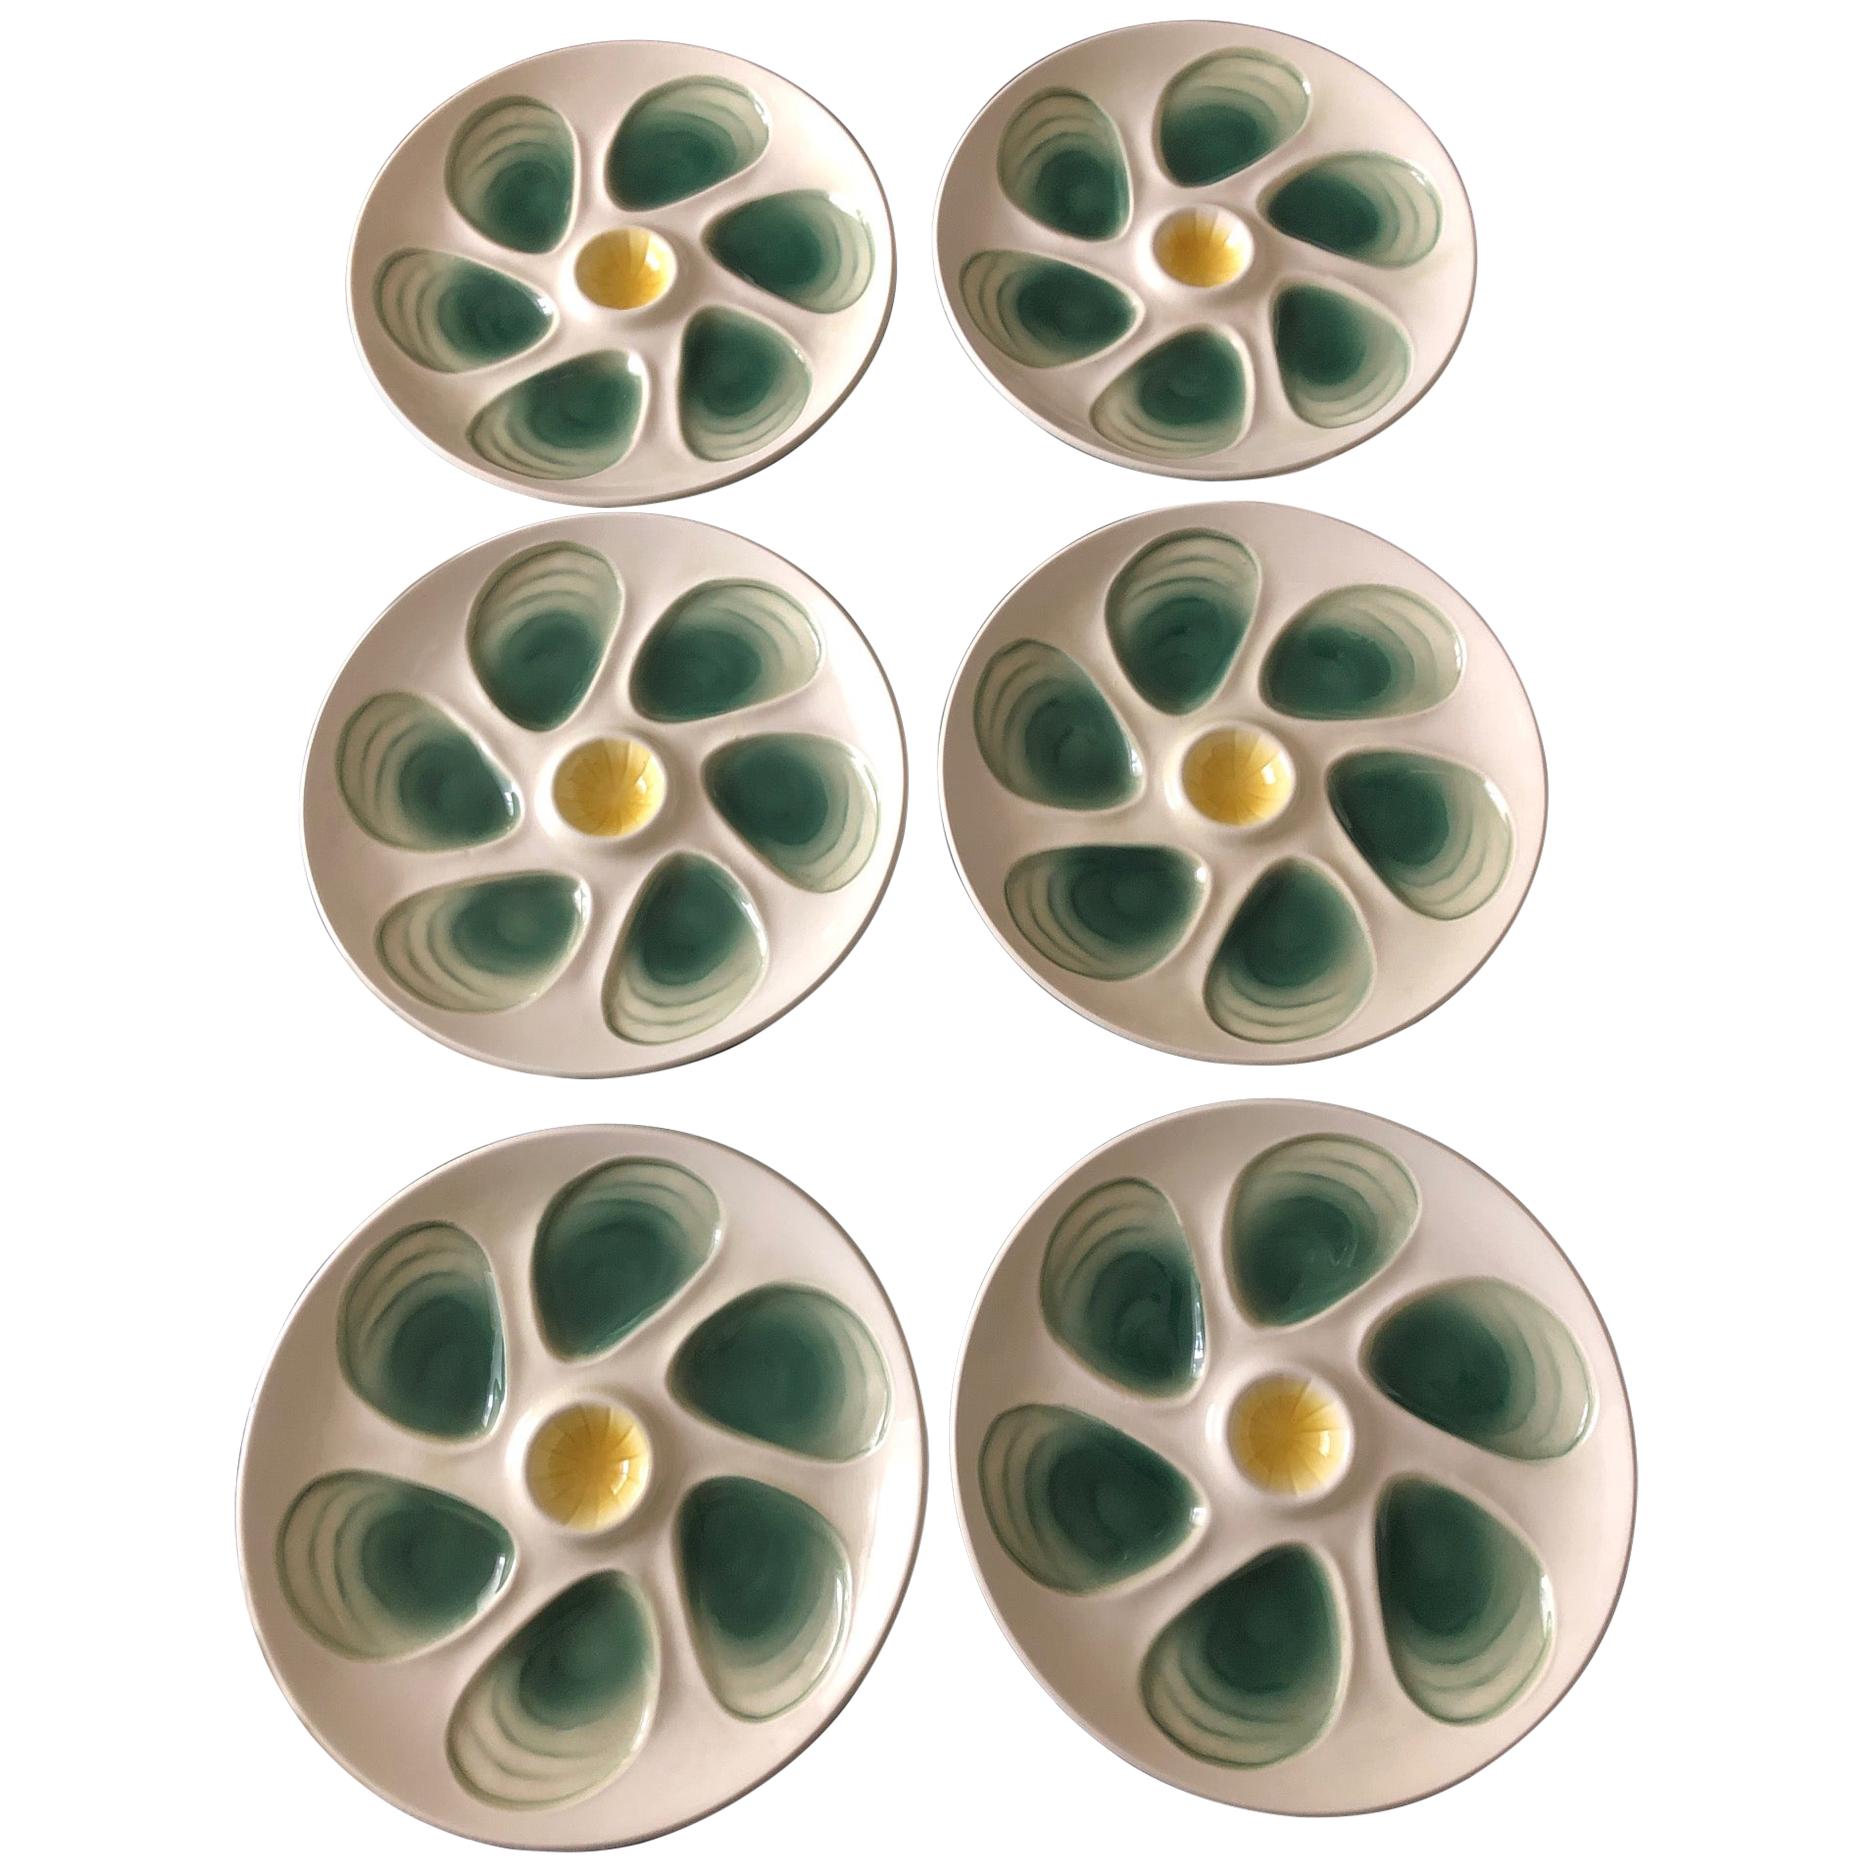 Set of 6 Oyster Plates from Salins, France